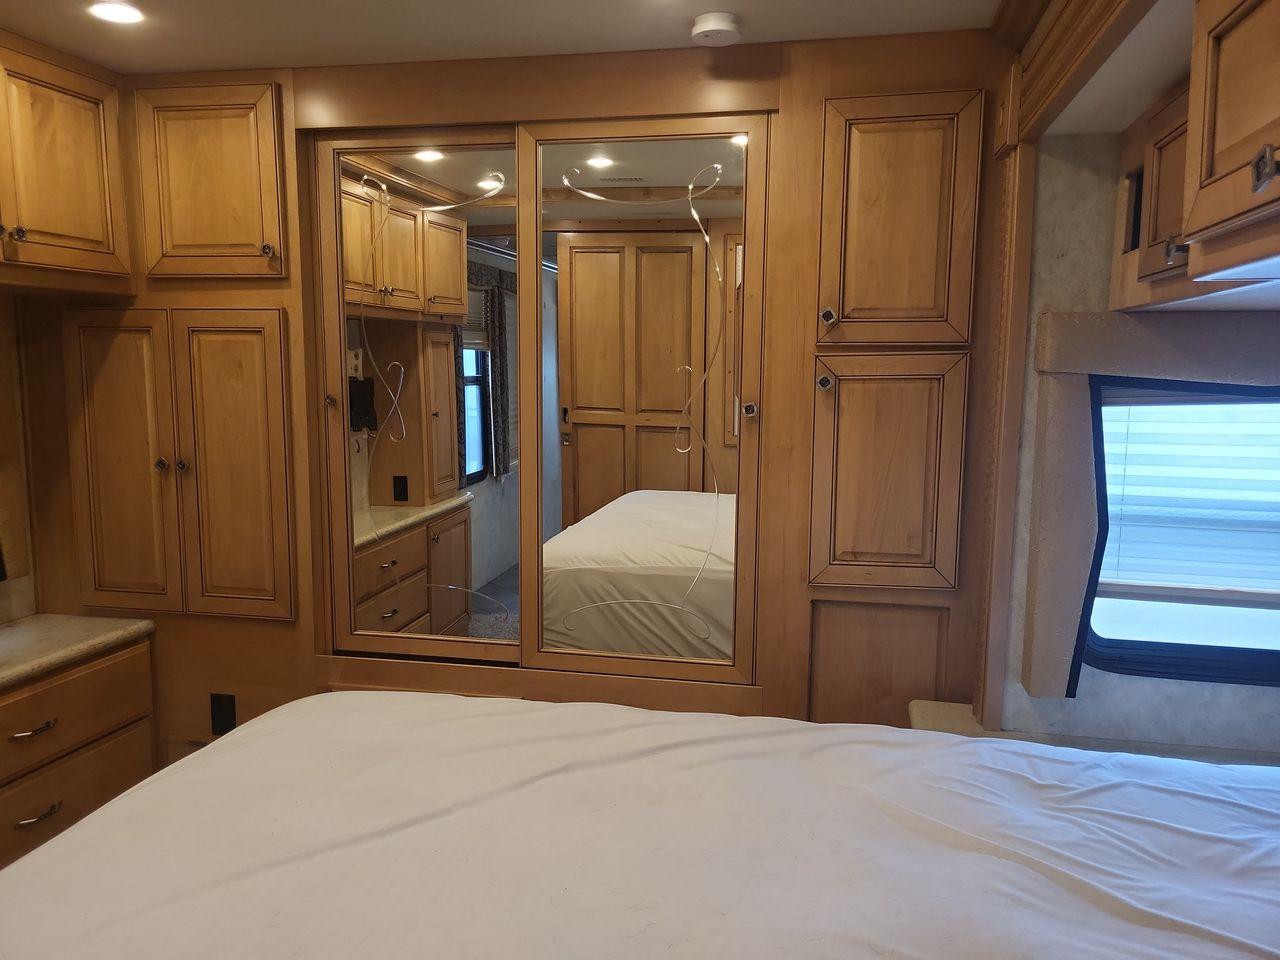 2009 WHITE AMERICAN COACH ALLEGIANCE 40X (4VZBR1D9X9C) , Length: 40.96 ft. | Gross Weight: 34,600 lbs. | Slides: 3 transmission, located at 4319 N Main St, Cleburne, TX, 76033, (817) 678-5133, 32.385960, -97.391212 - Photo #20